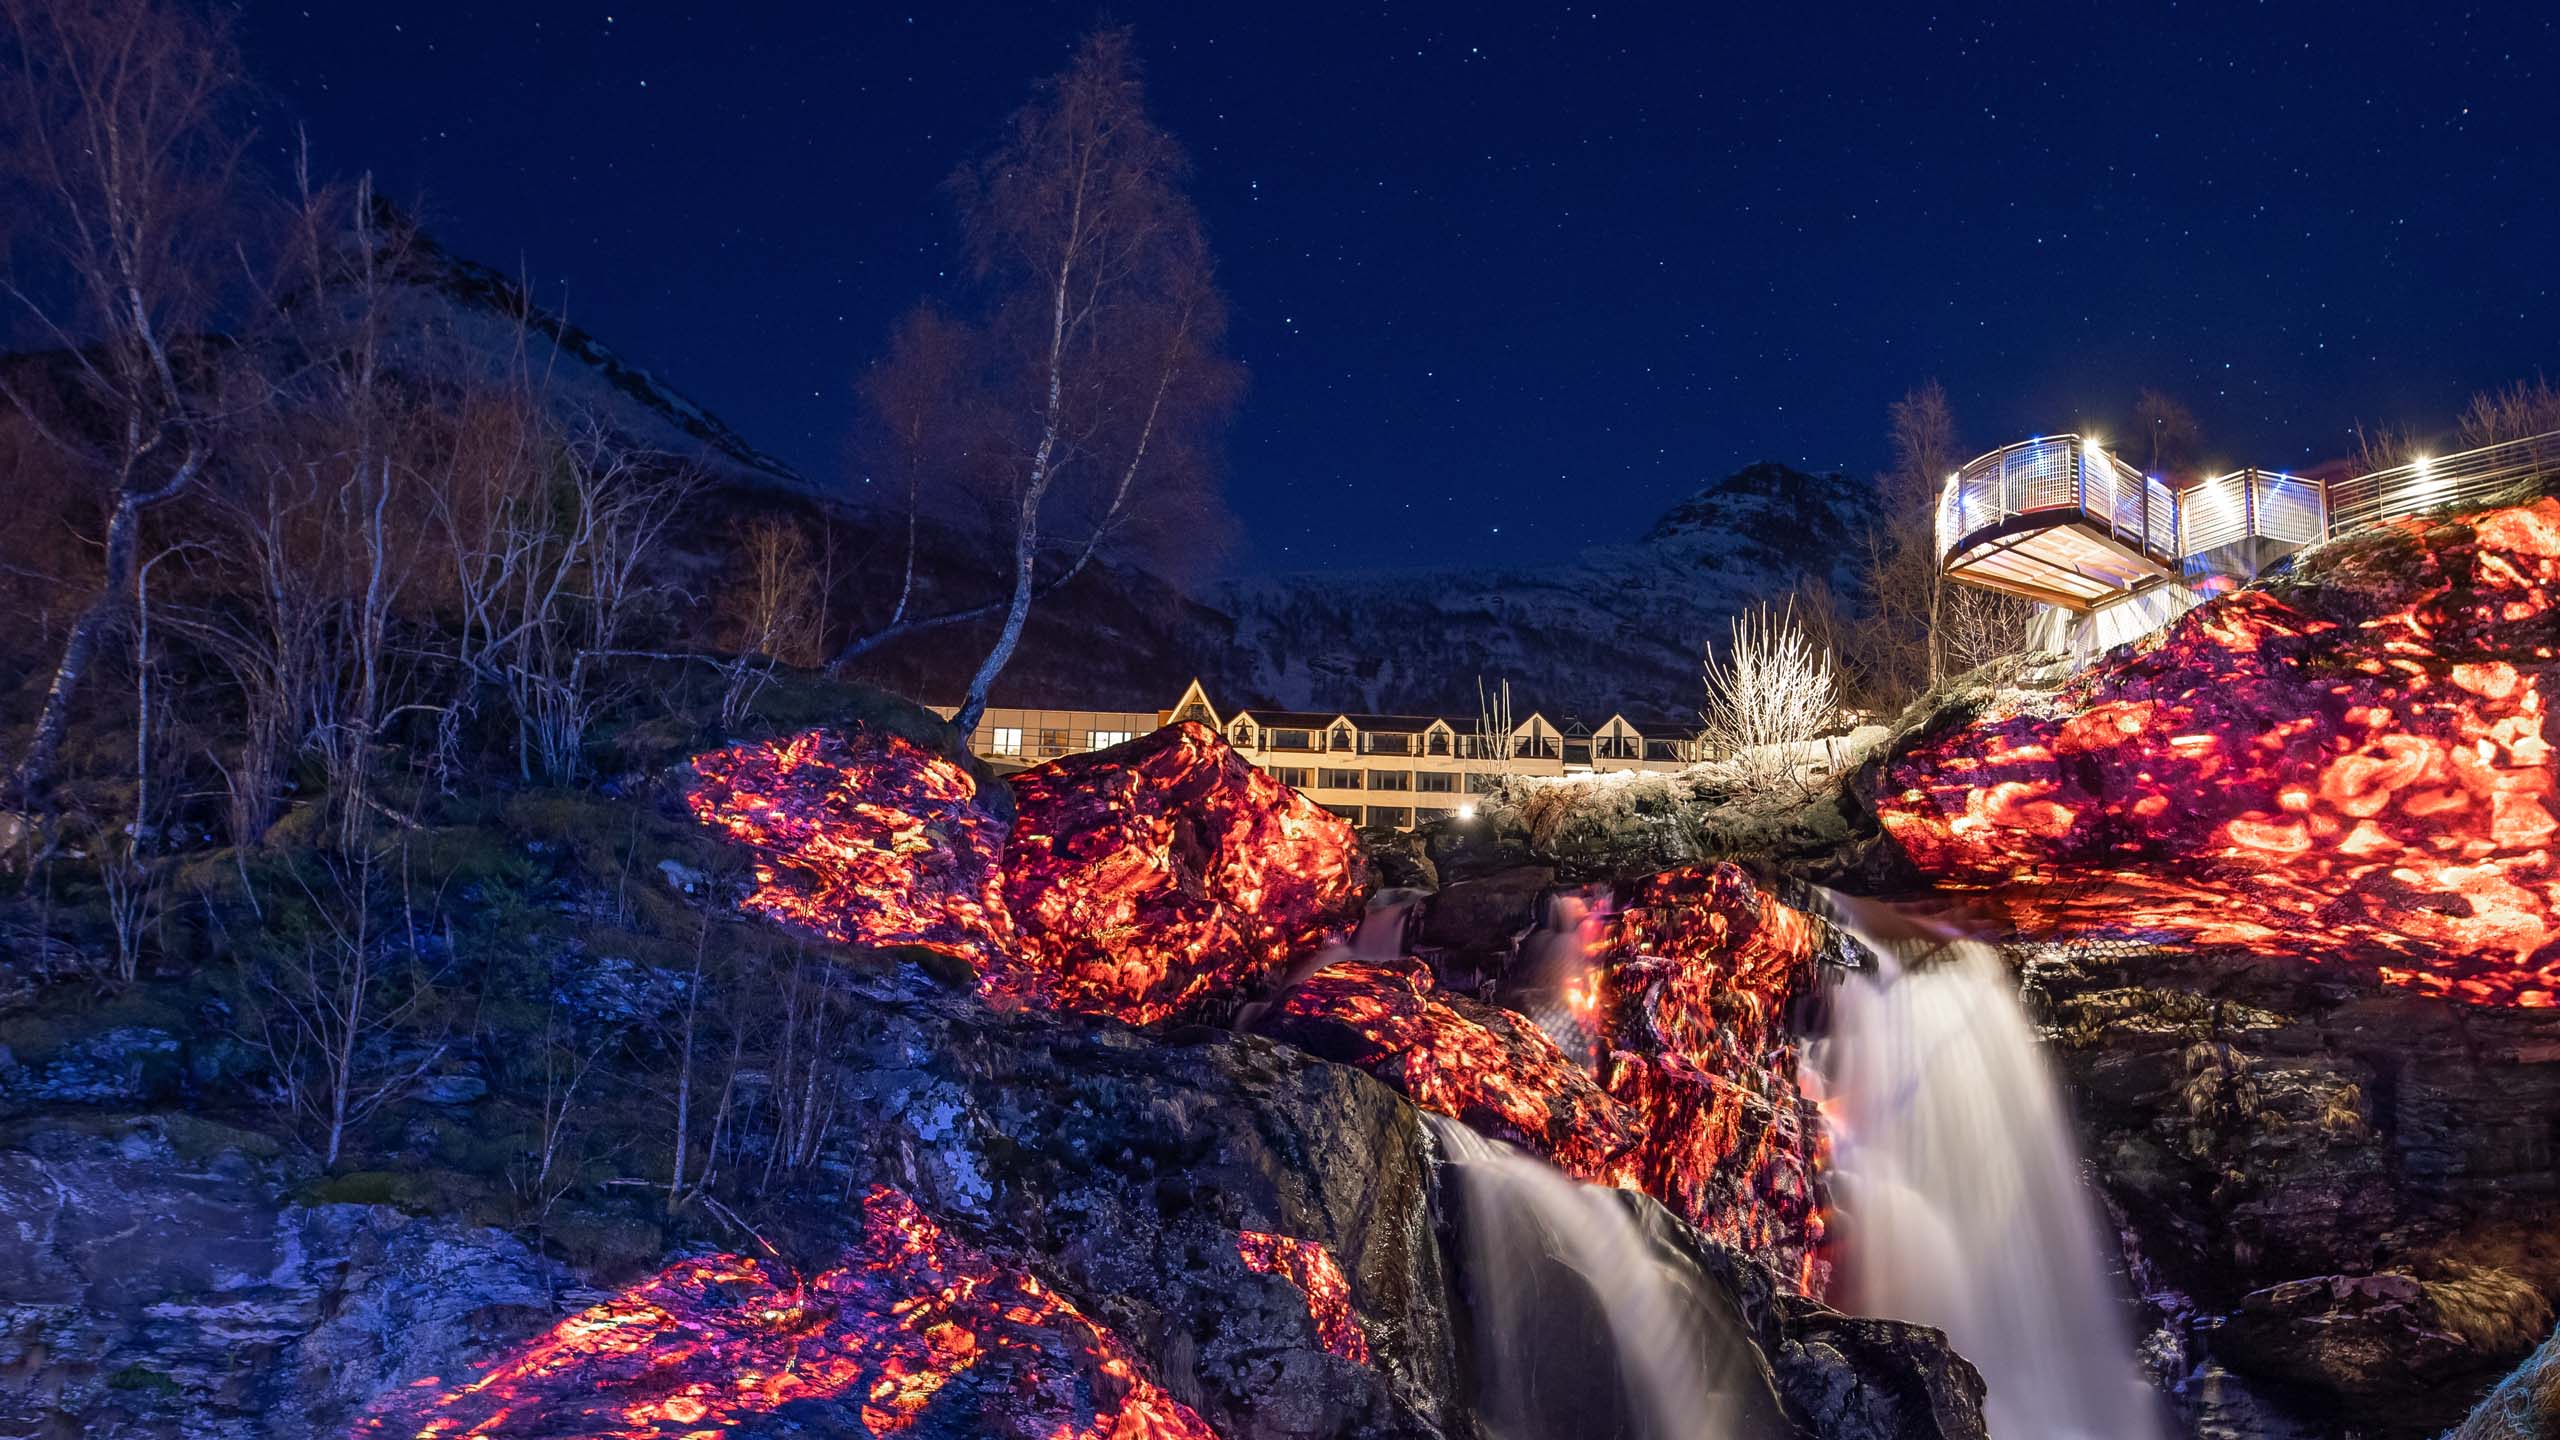 Video-mapping in nature on rocks and a waterfall with fire and lava visuals Geiranger Fjord